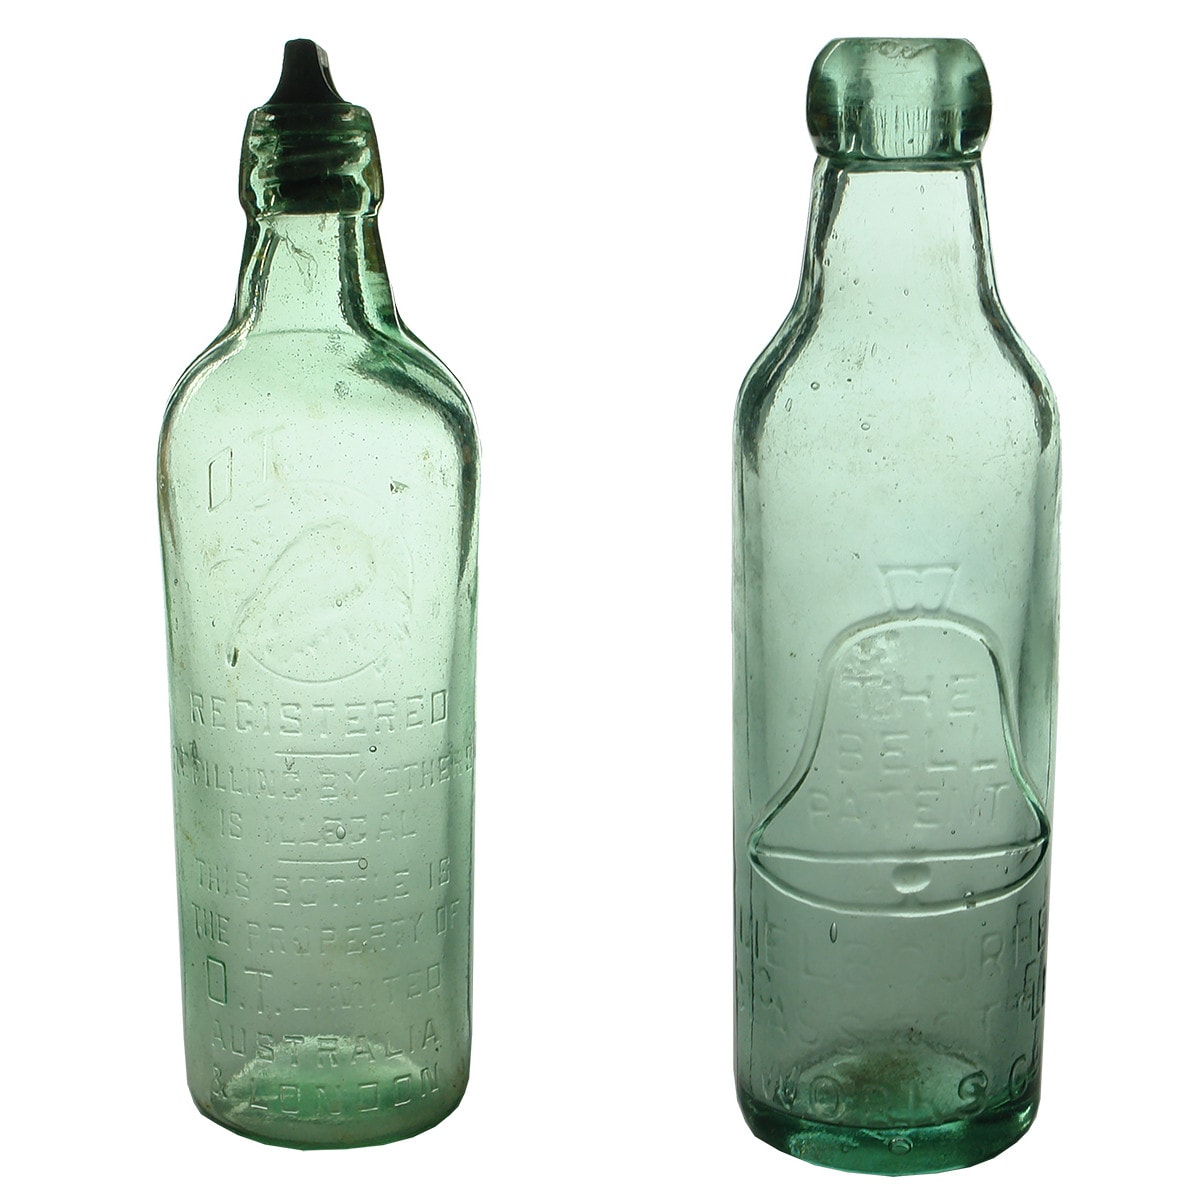 Pair of Aerated Waters: OT Limited Internal Thread and Bell Patent, Melbourne Glass Works. (Victoria)